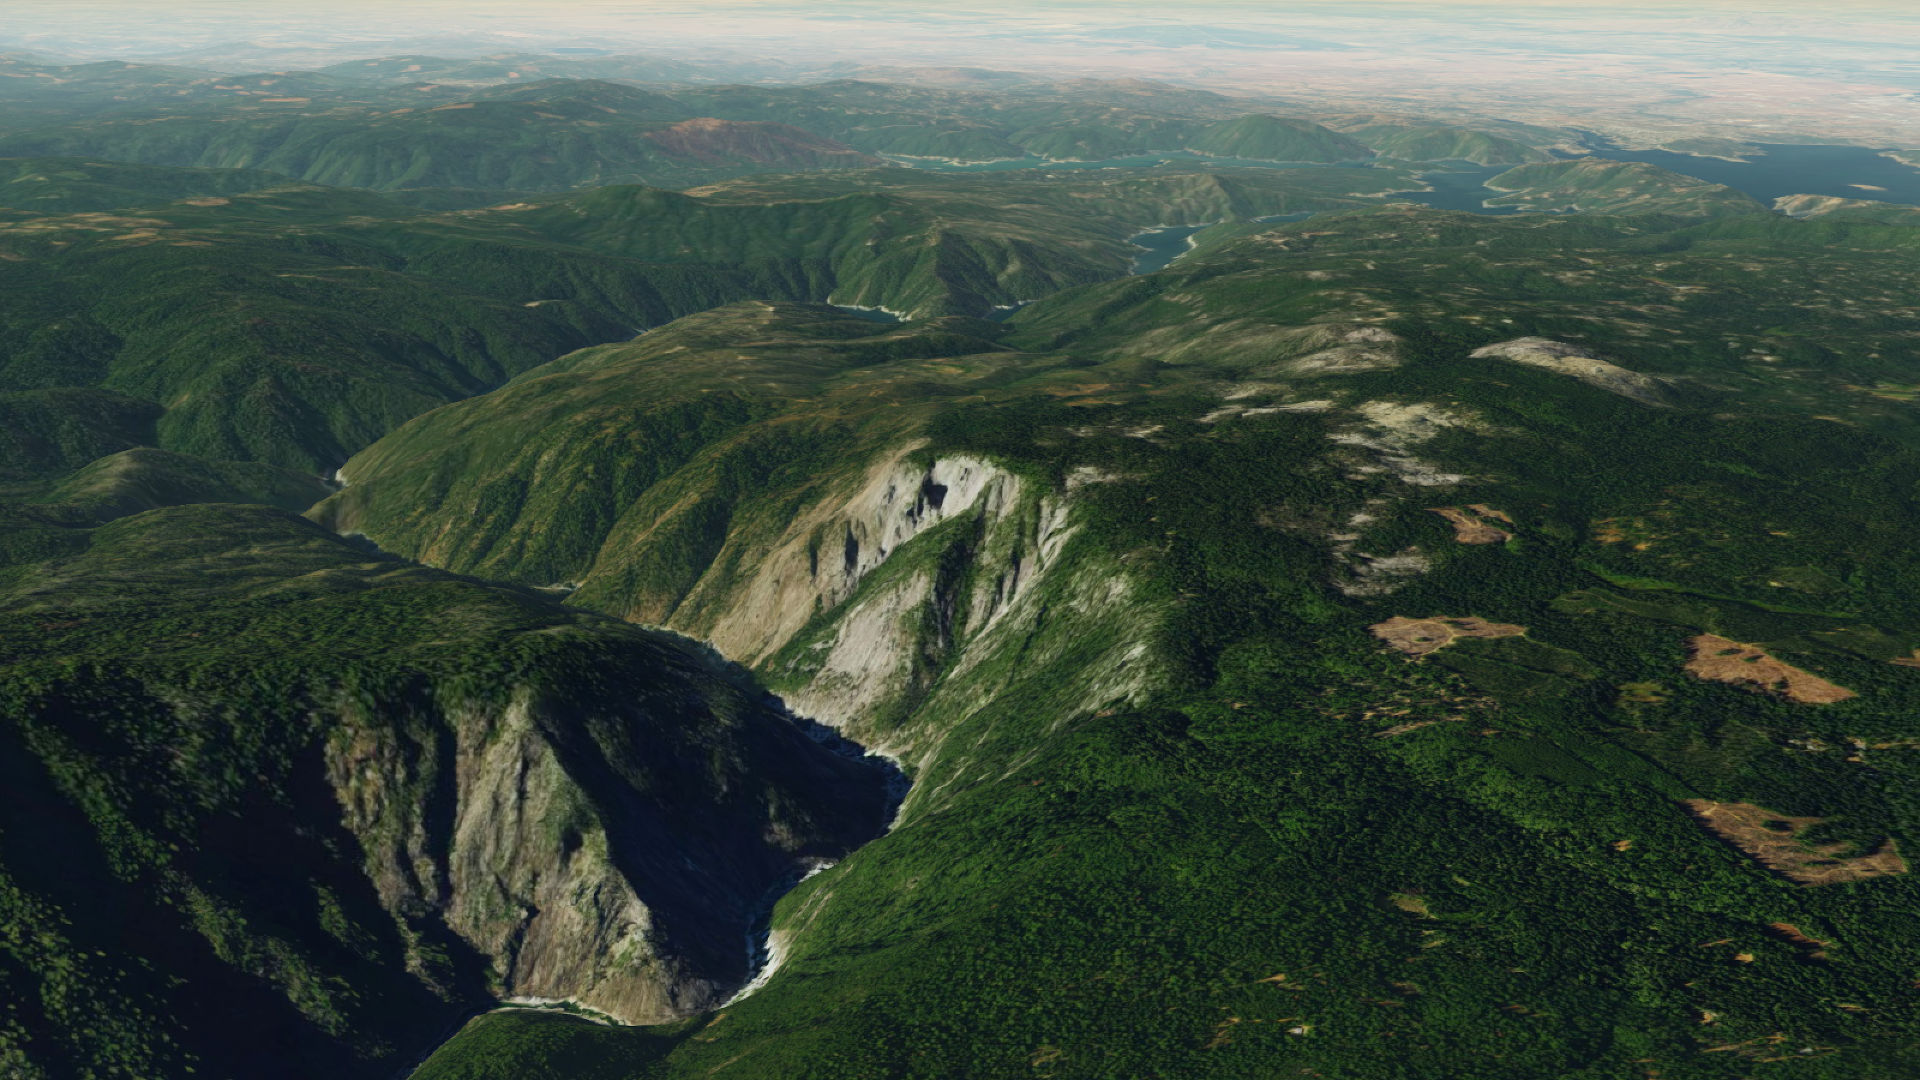 Combine 3D terrain and high-res aerial imagery from MapTiler to create photorealistic scenes like this one